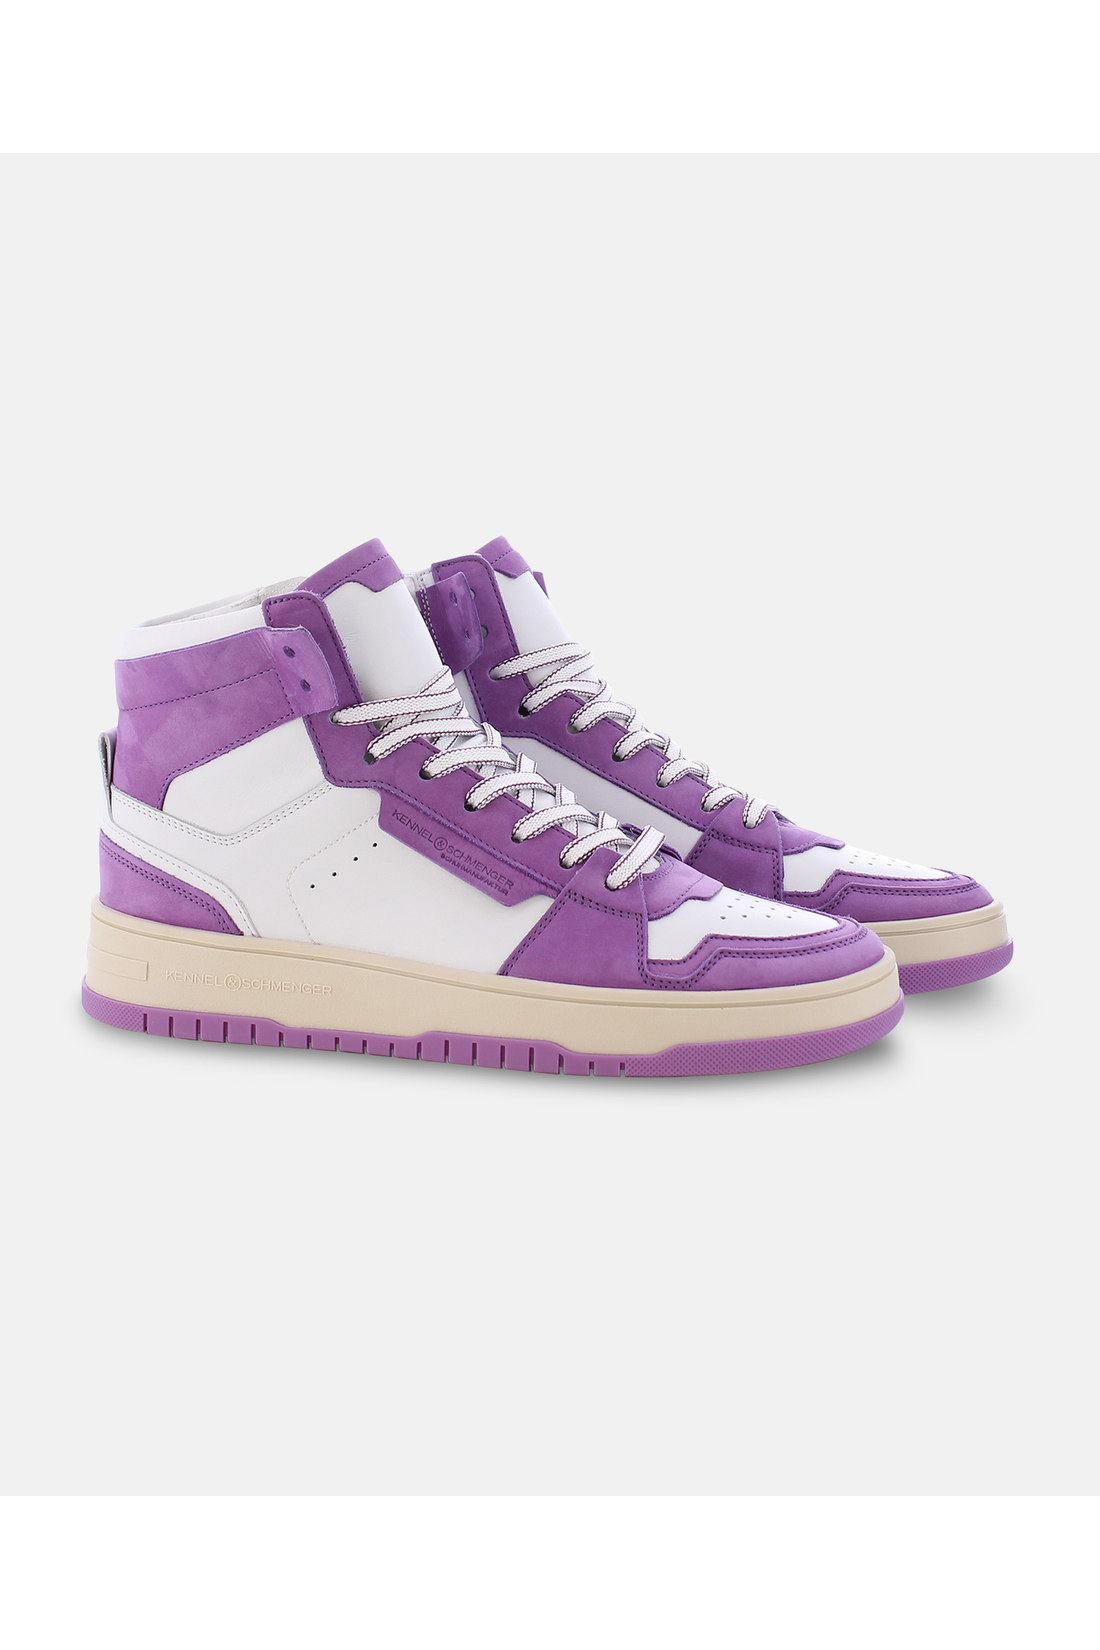 Kennel-Schmenger-OUTLET-SALE-DRIFT-Sneakers-2_5-35-Lila-ARCHIVE-COLLECTION.png